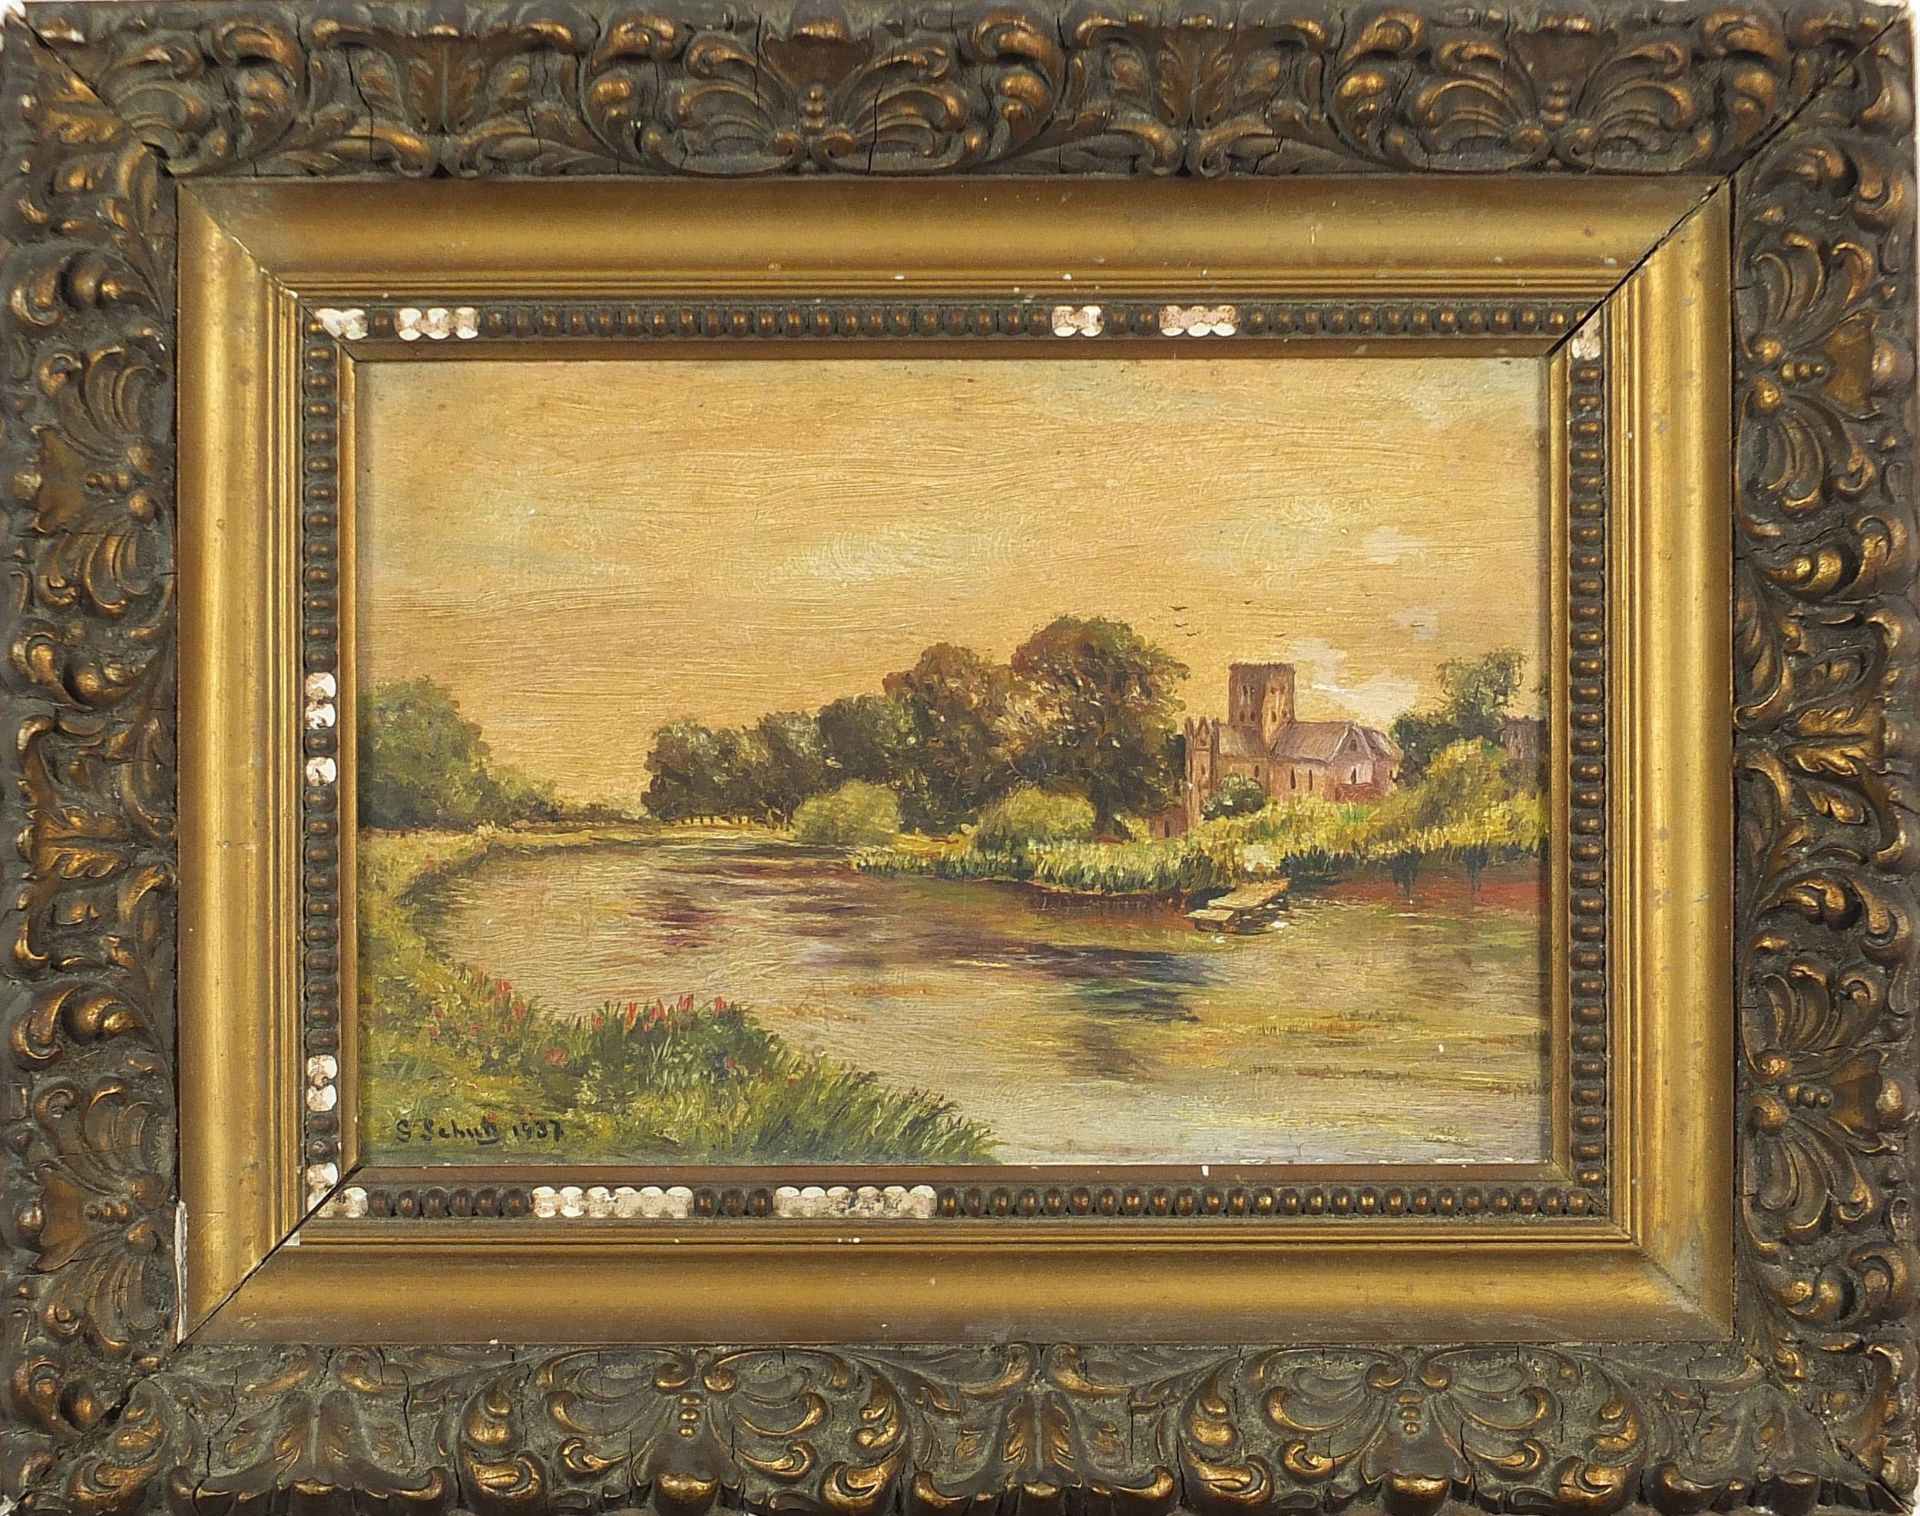 G Schuh 1937 - River landscape with a church, 20th century oil on board, mounted and framed, 29cm - Image 2 of 4